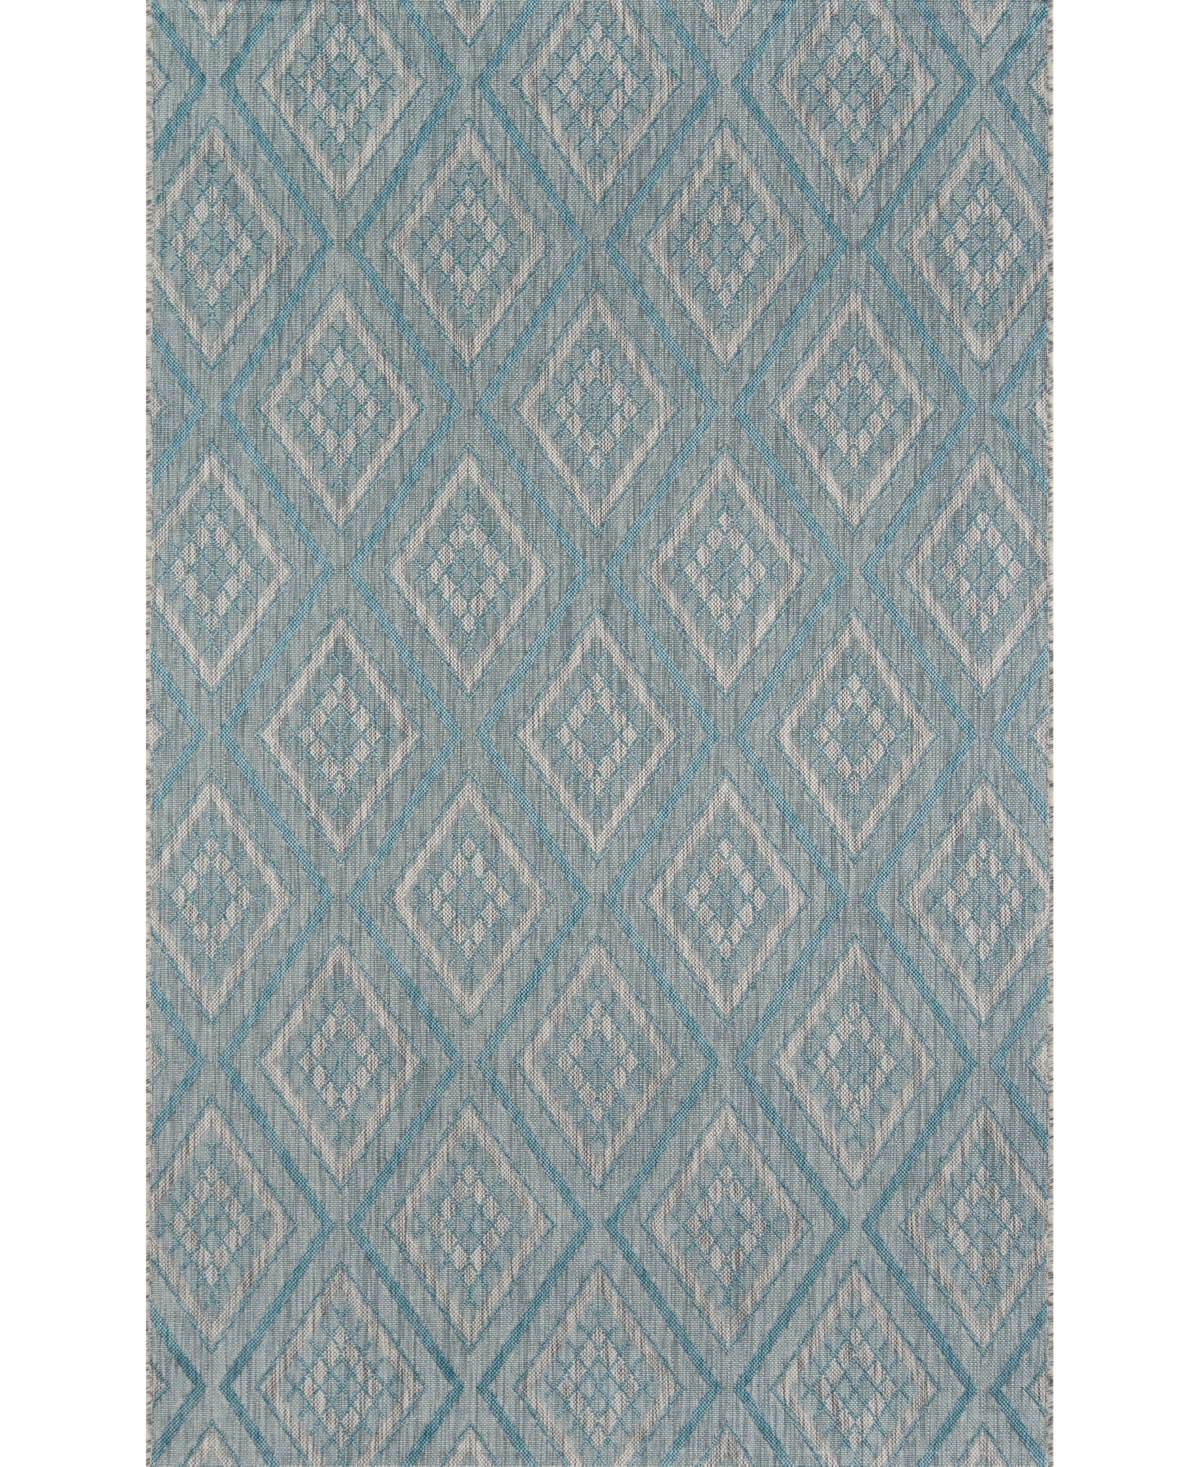 Madcap Cottage Lake Palace Rajastan Weekend 6'7" X 9'6" Indoor/outdoor Area Rug In Light Blue